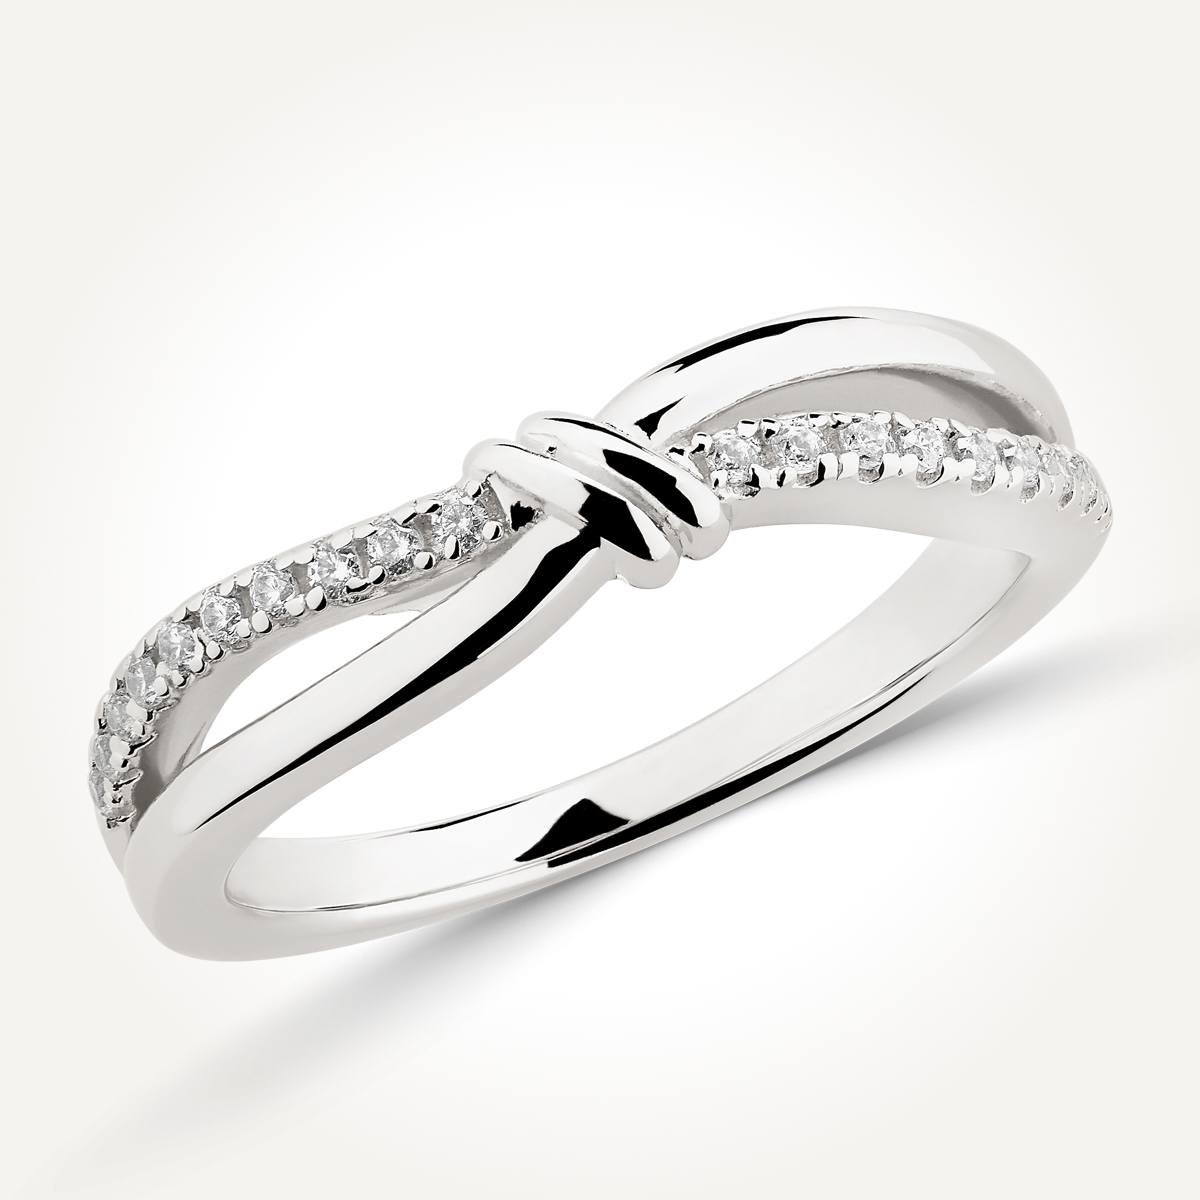 14KT White Gold Twist Knot Ring